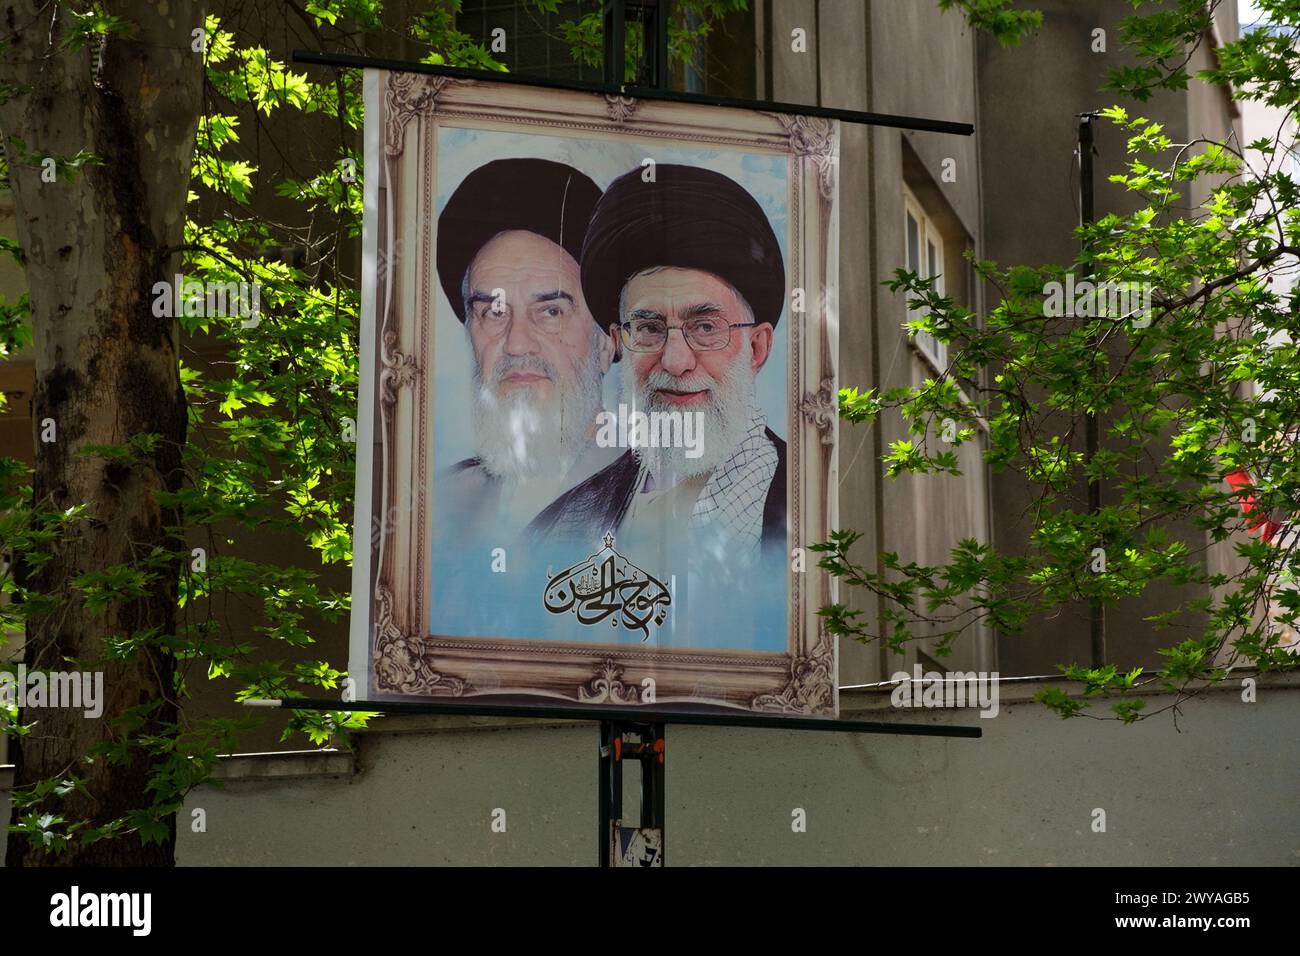 Ayatollah's photos hung on a rack. Islamic Republic of Iran establisher Ruhollah Khomeini on the left and the current leader Ali Khamenei on the right Stock Photo